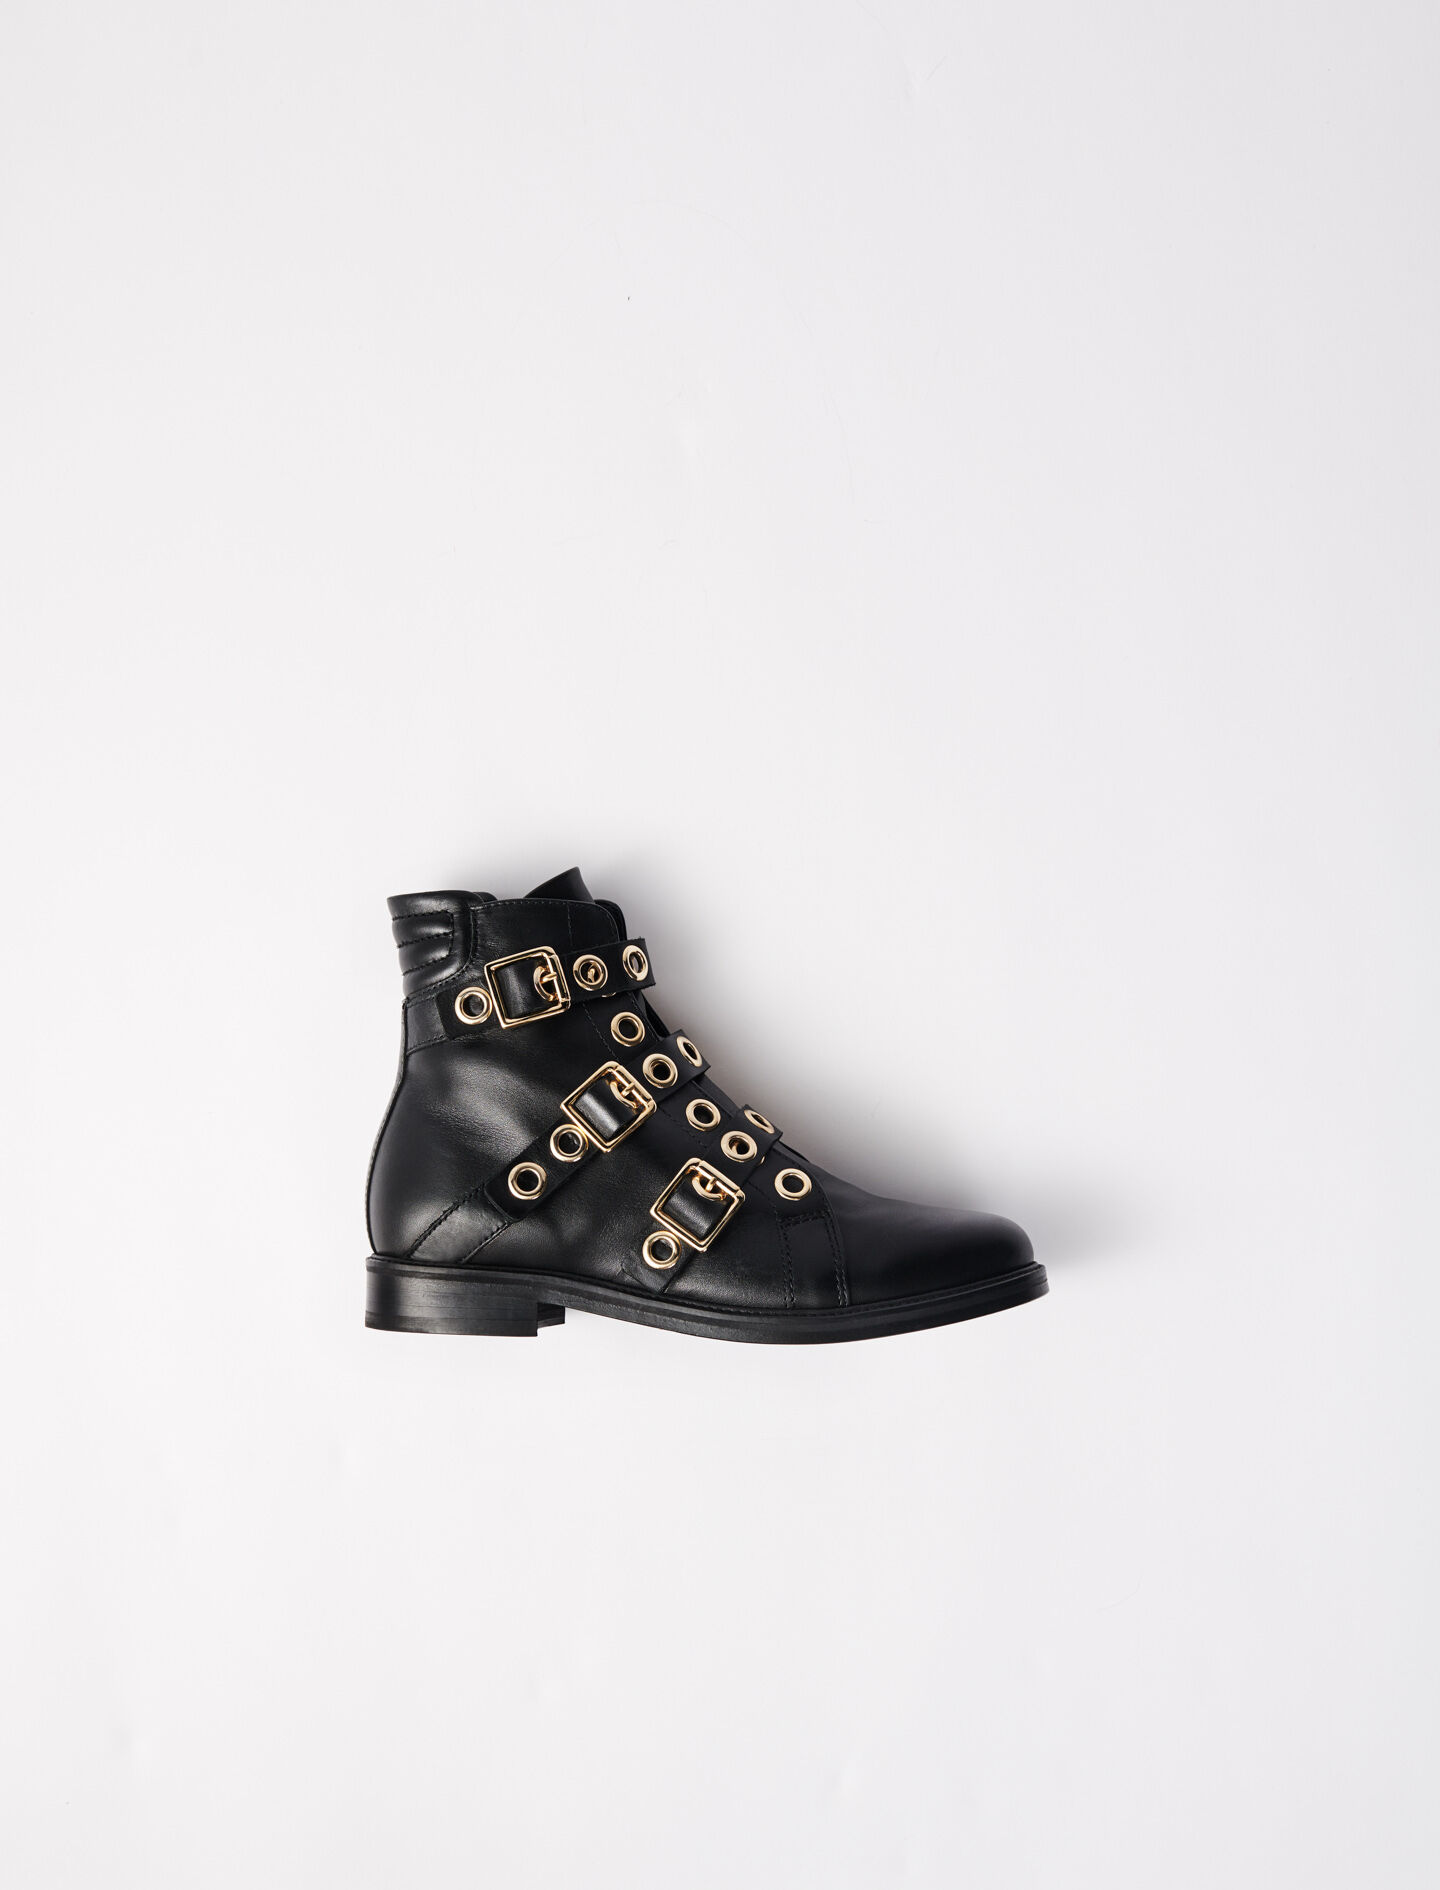 maje official boots